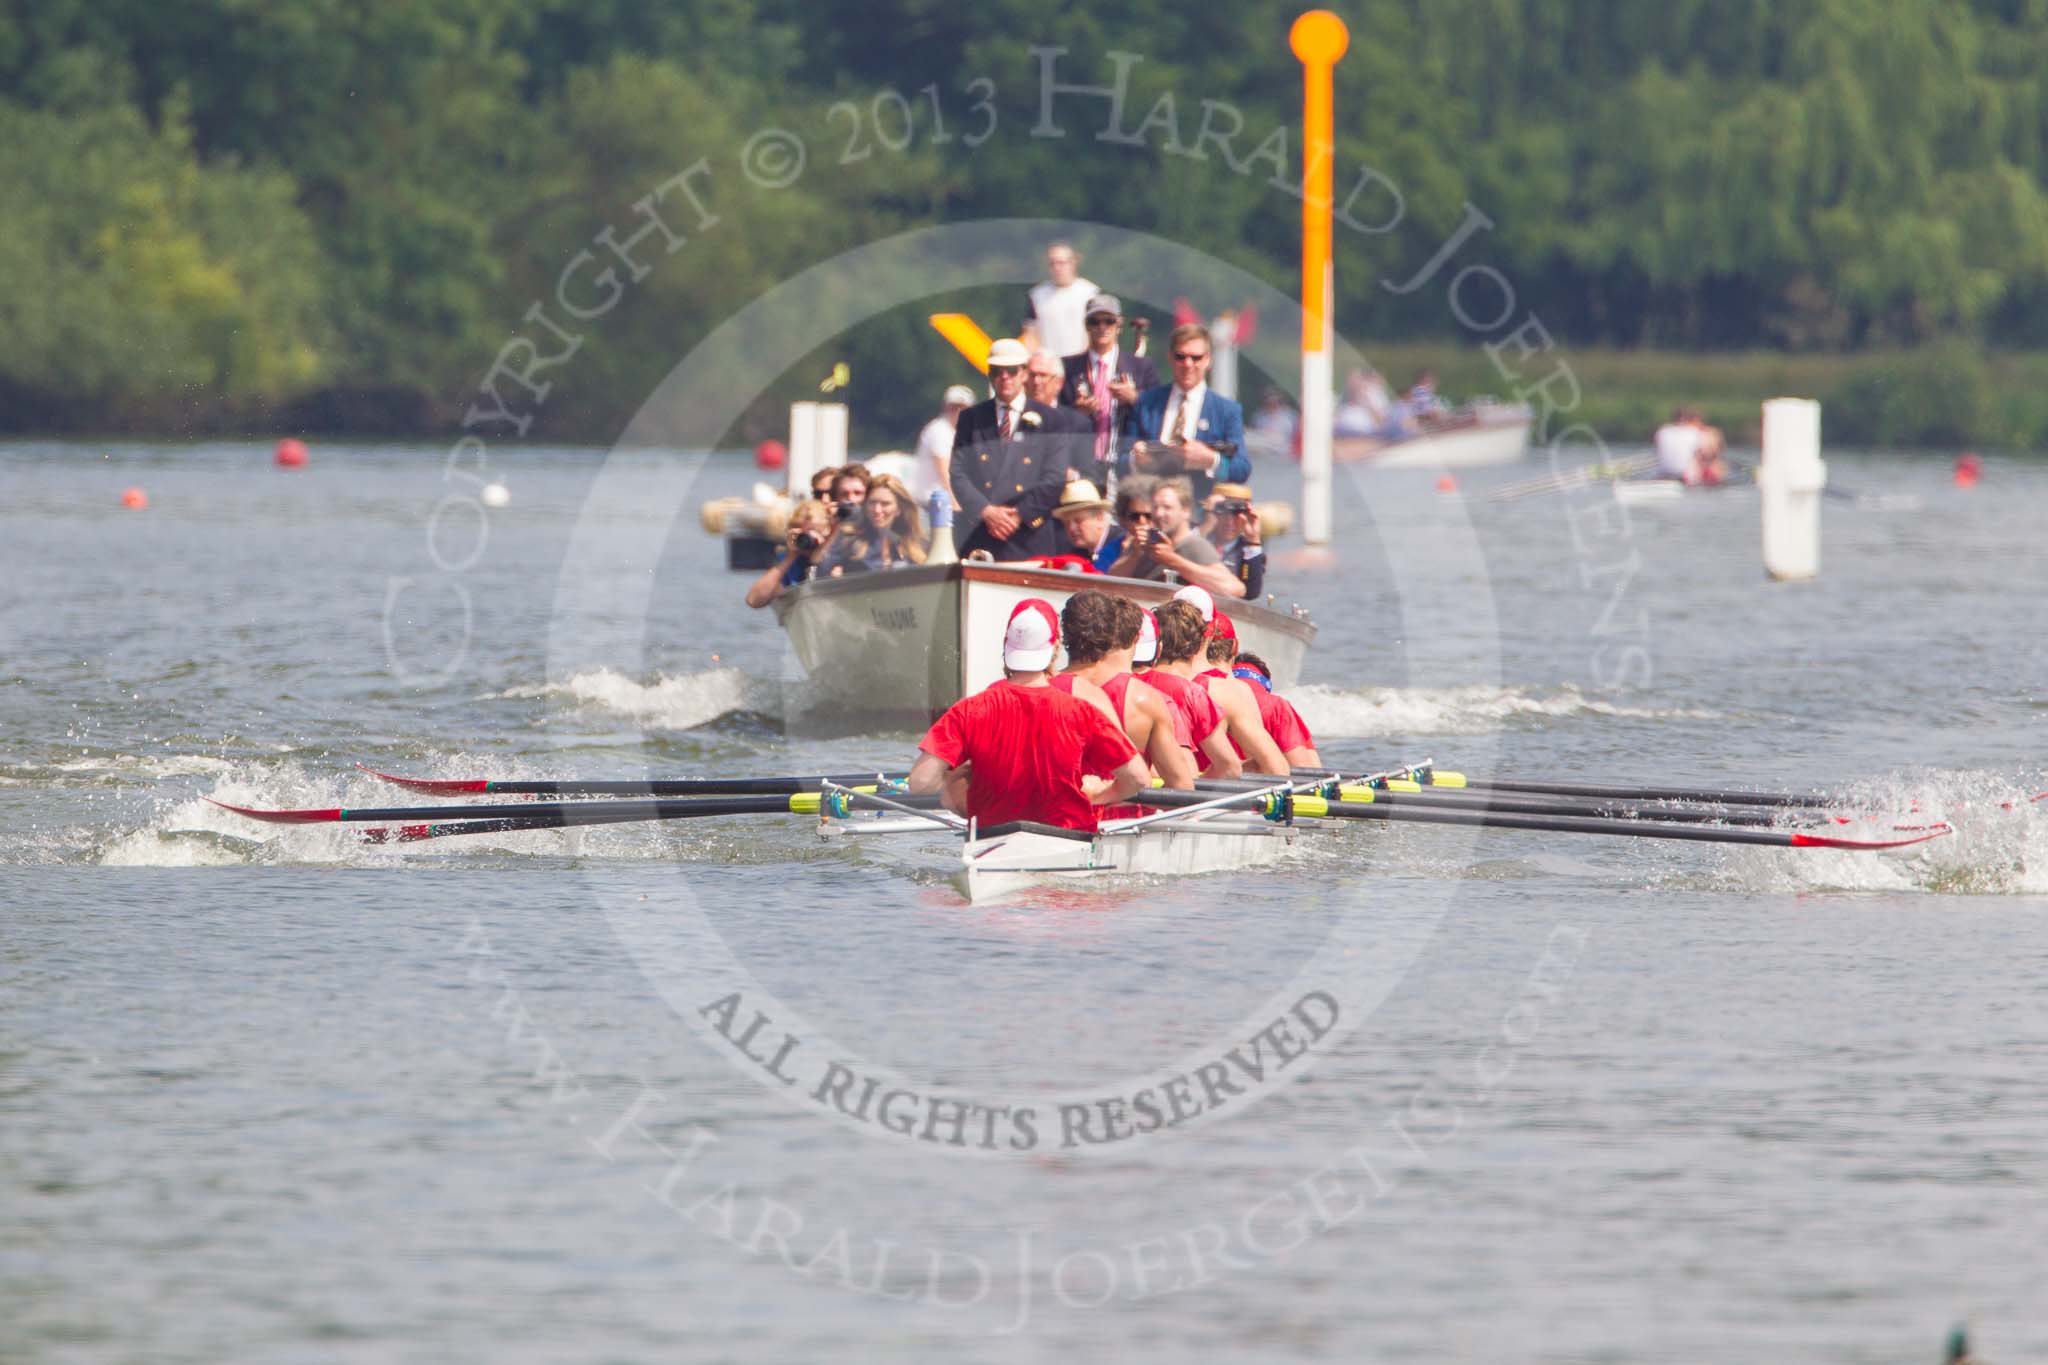 Henley Royal Regatta 2013, Saturday: Race No. 12 for the Temple Challenge Cup, St. Petersburg University, Russia (orage), v Delftsche Studenten Roeivereeninging Laga, Holland (red). Image #244, 06 July 2013 11:51 River Thames, Henley on Thames, UK